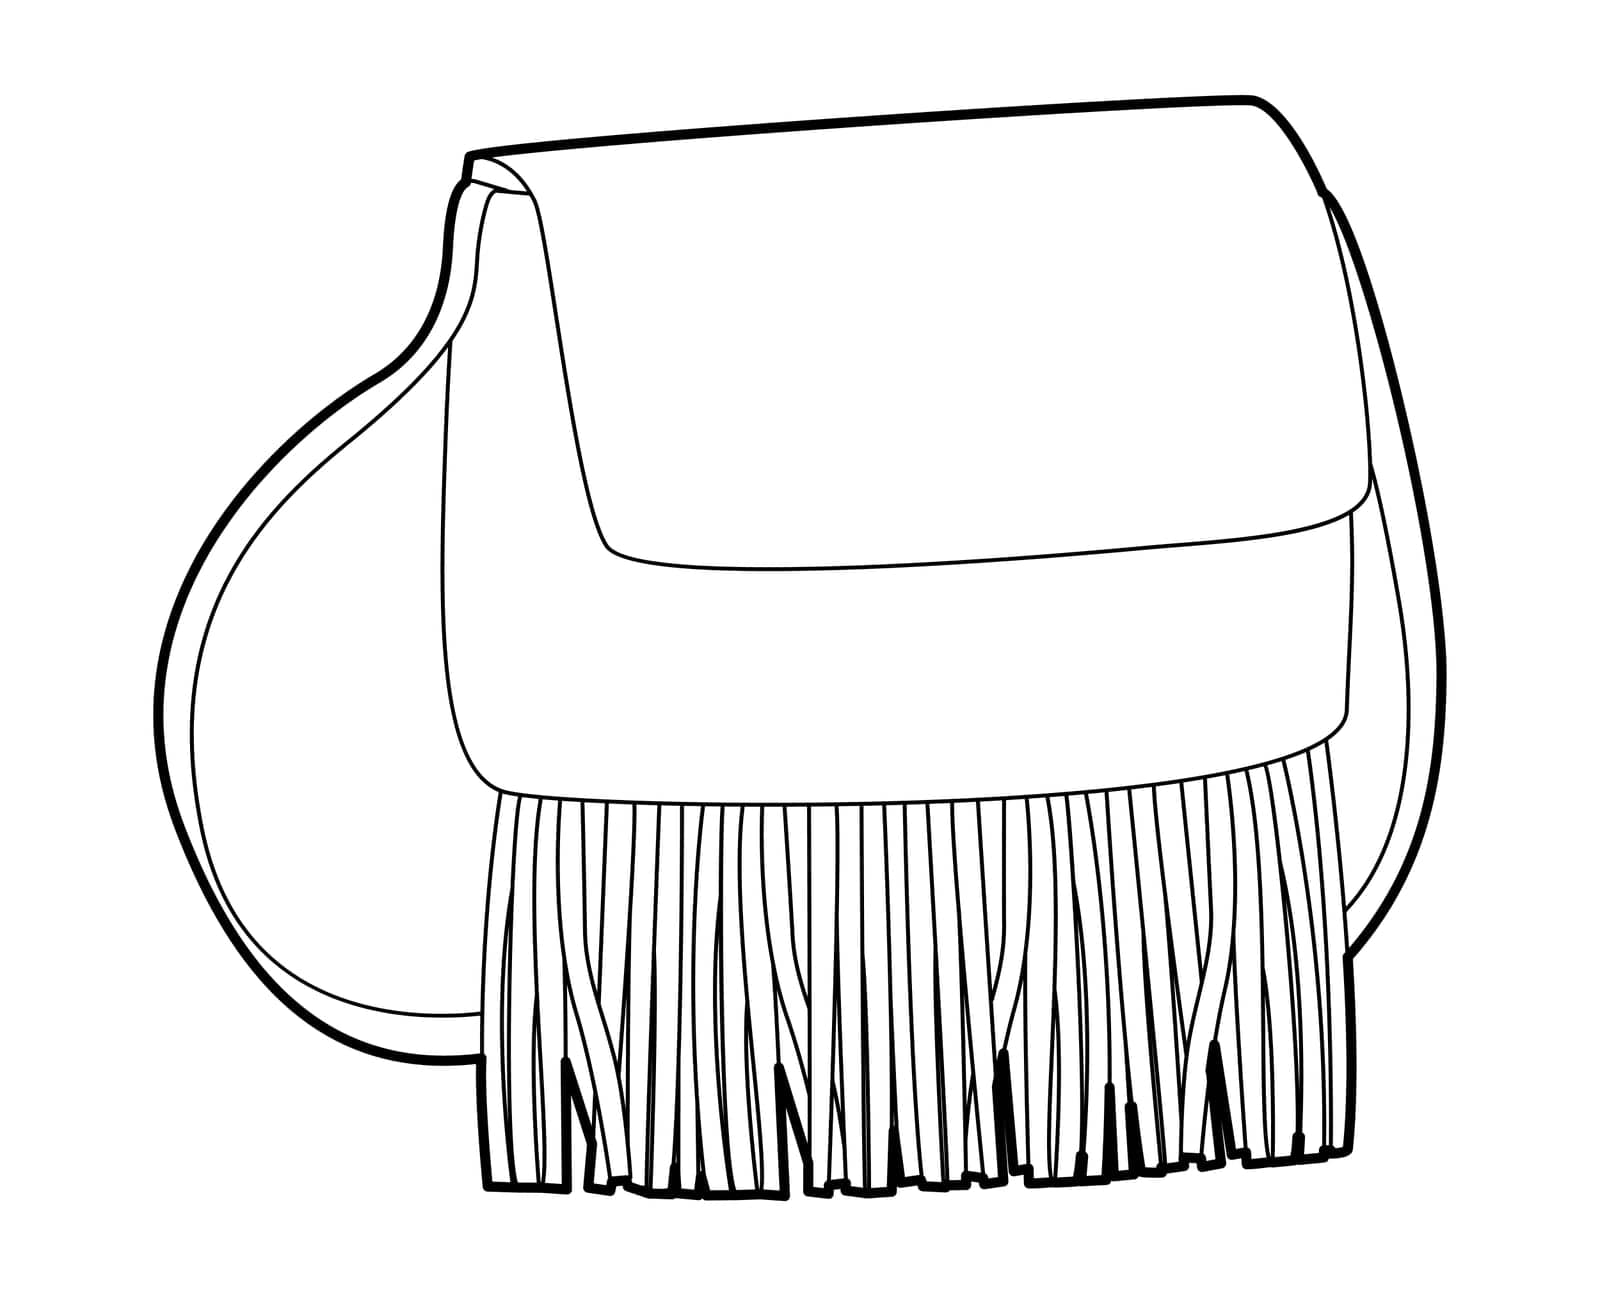 Medicine bag Saddle silhouette crossbody with tassels fringe. Fashion accessory technical illustration. Vector satchel by Vectoressa